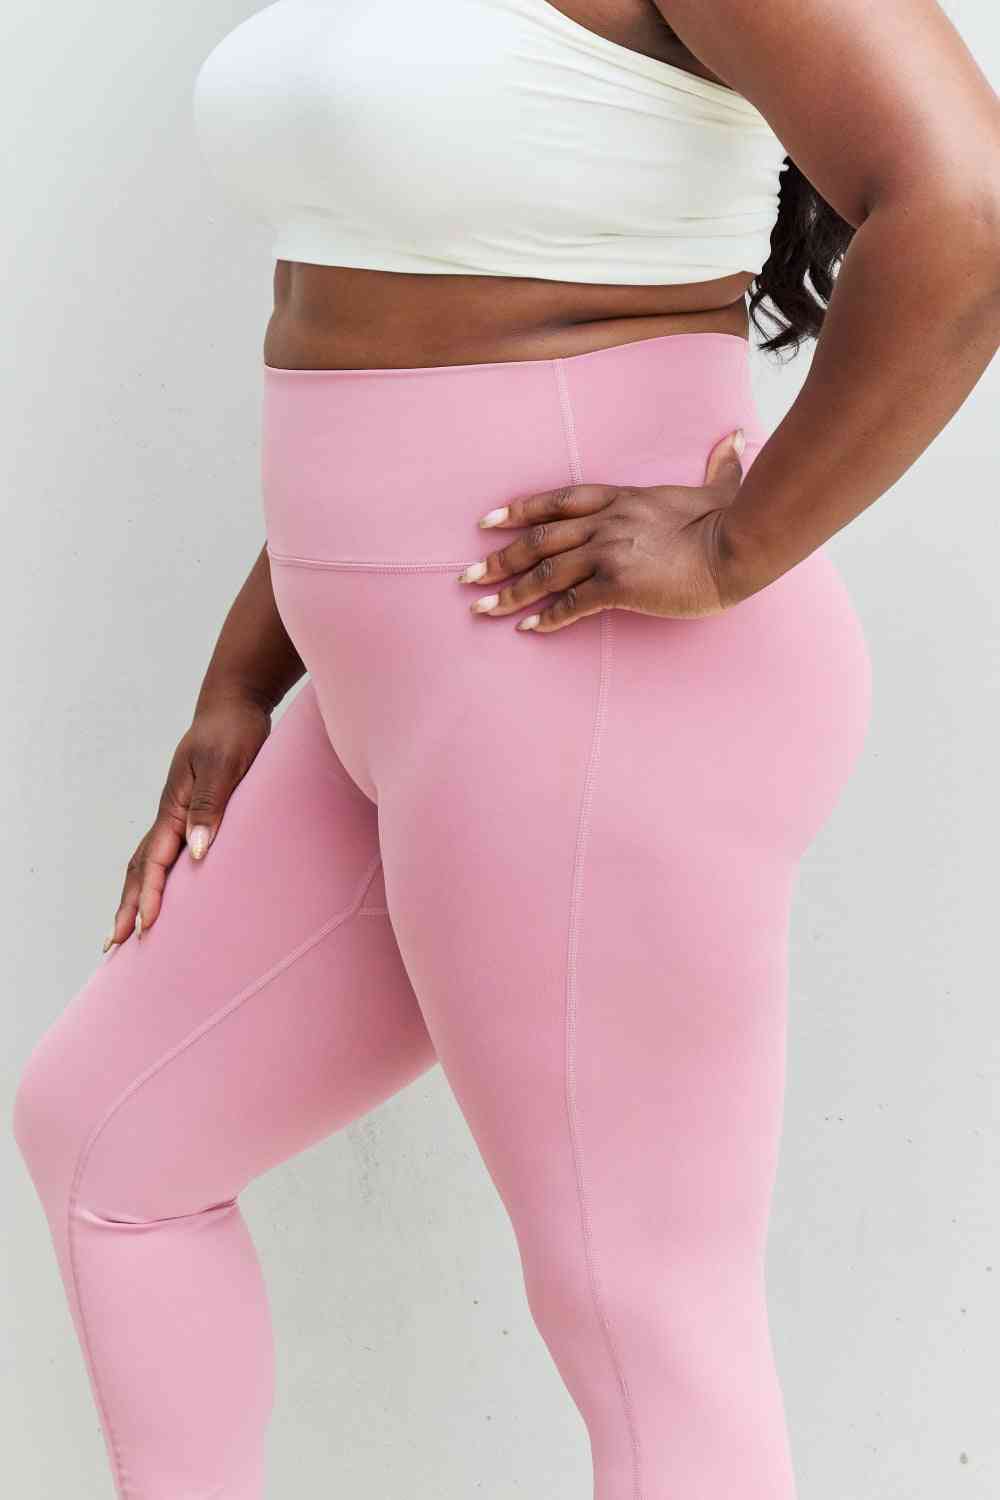 Zenana Fit For You Full Size High Waist Active Leggings in Light Rose - Sufyaa